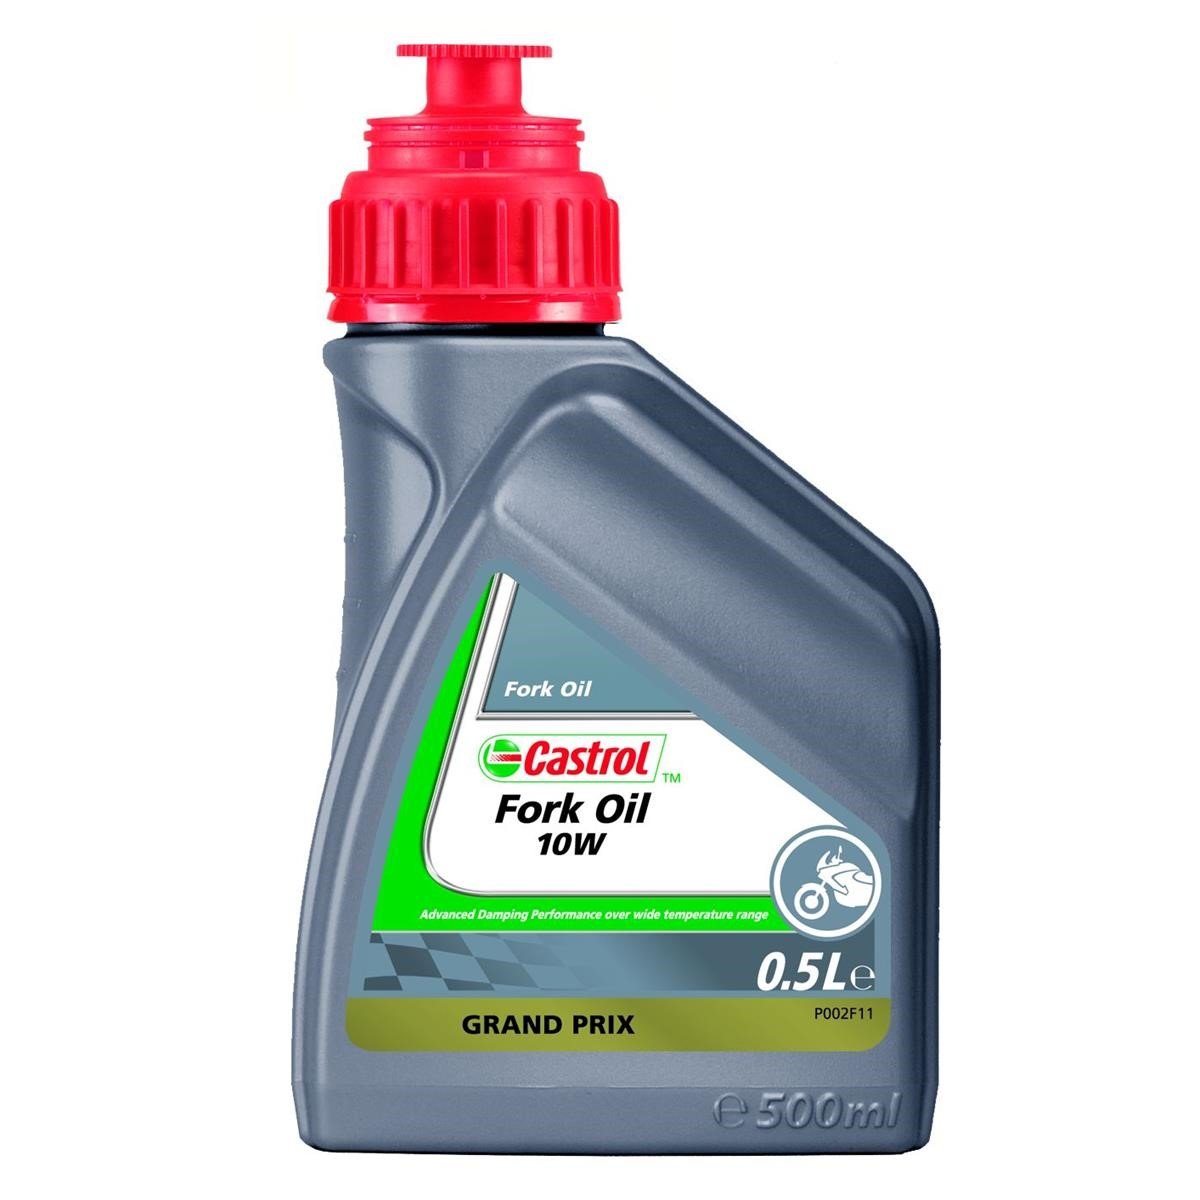 Castrol Olio Forcelle Fork Oil 10W, 500 ml